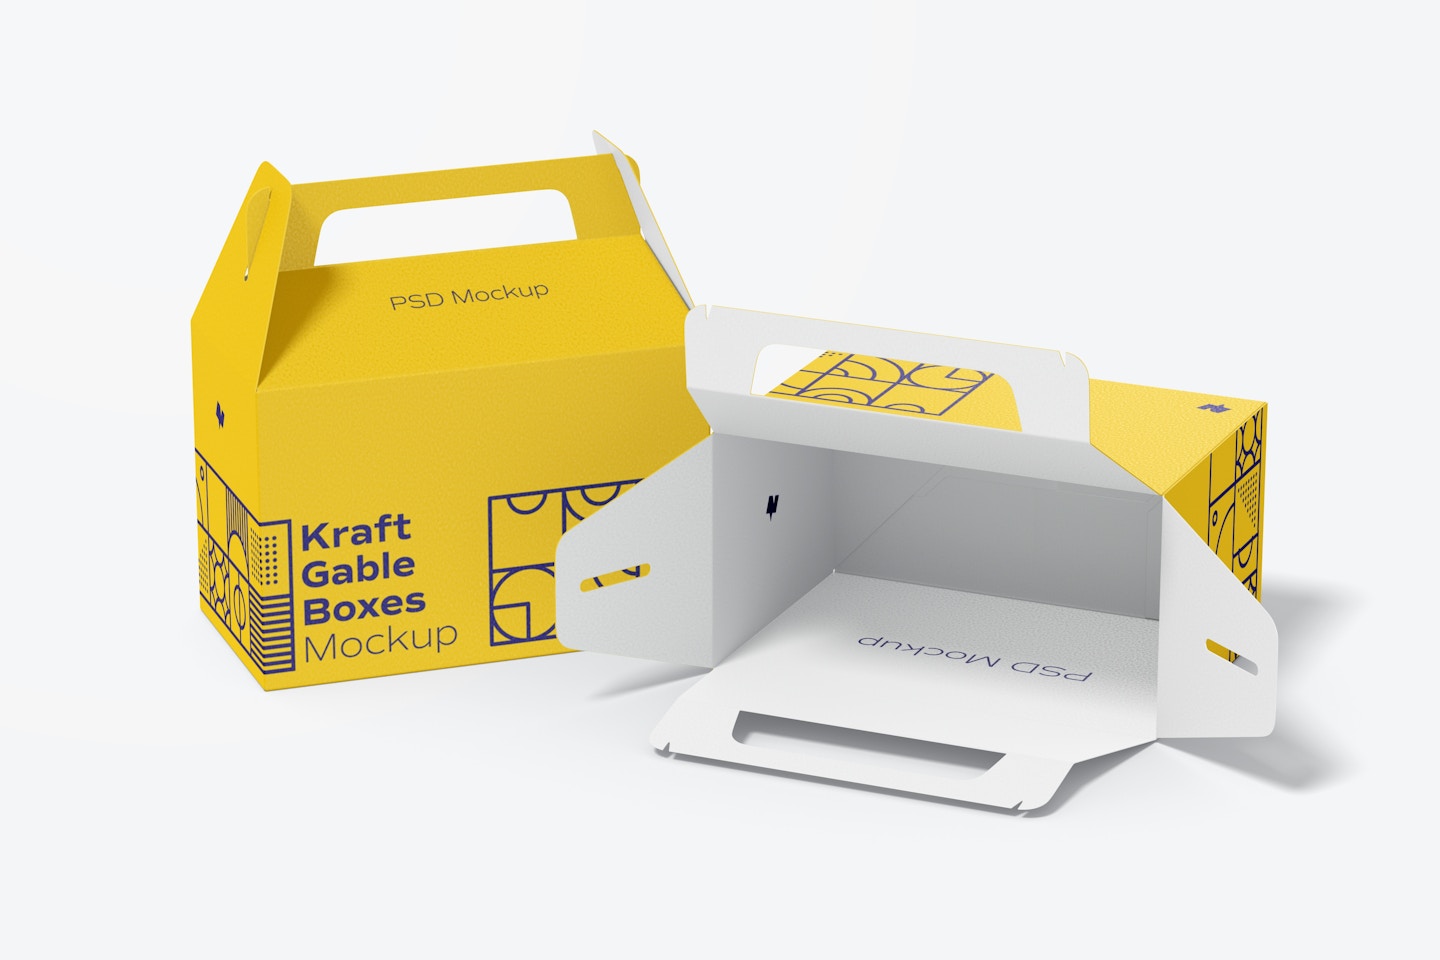 Kraft Gable Boxes Mockup, Opened and Closed